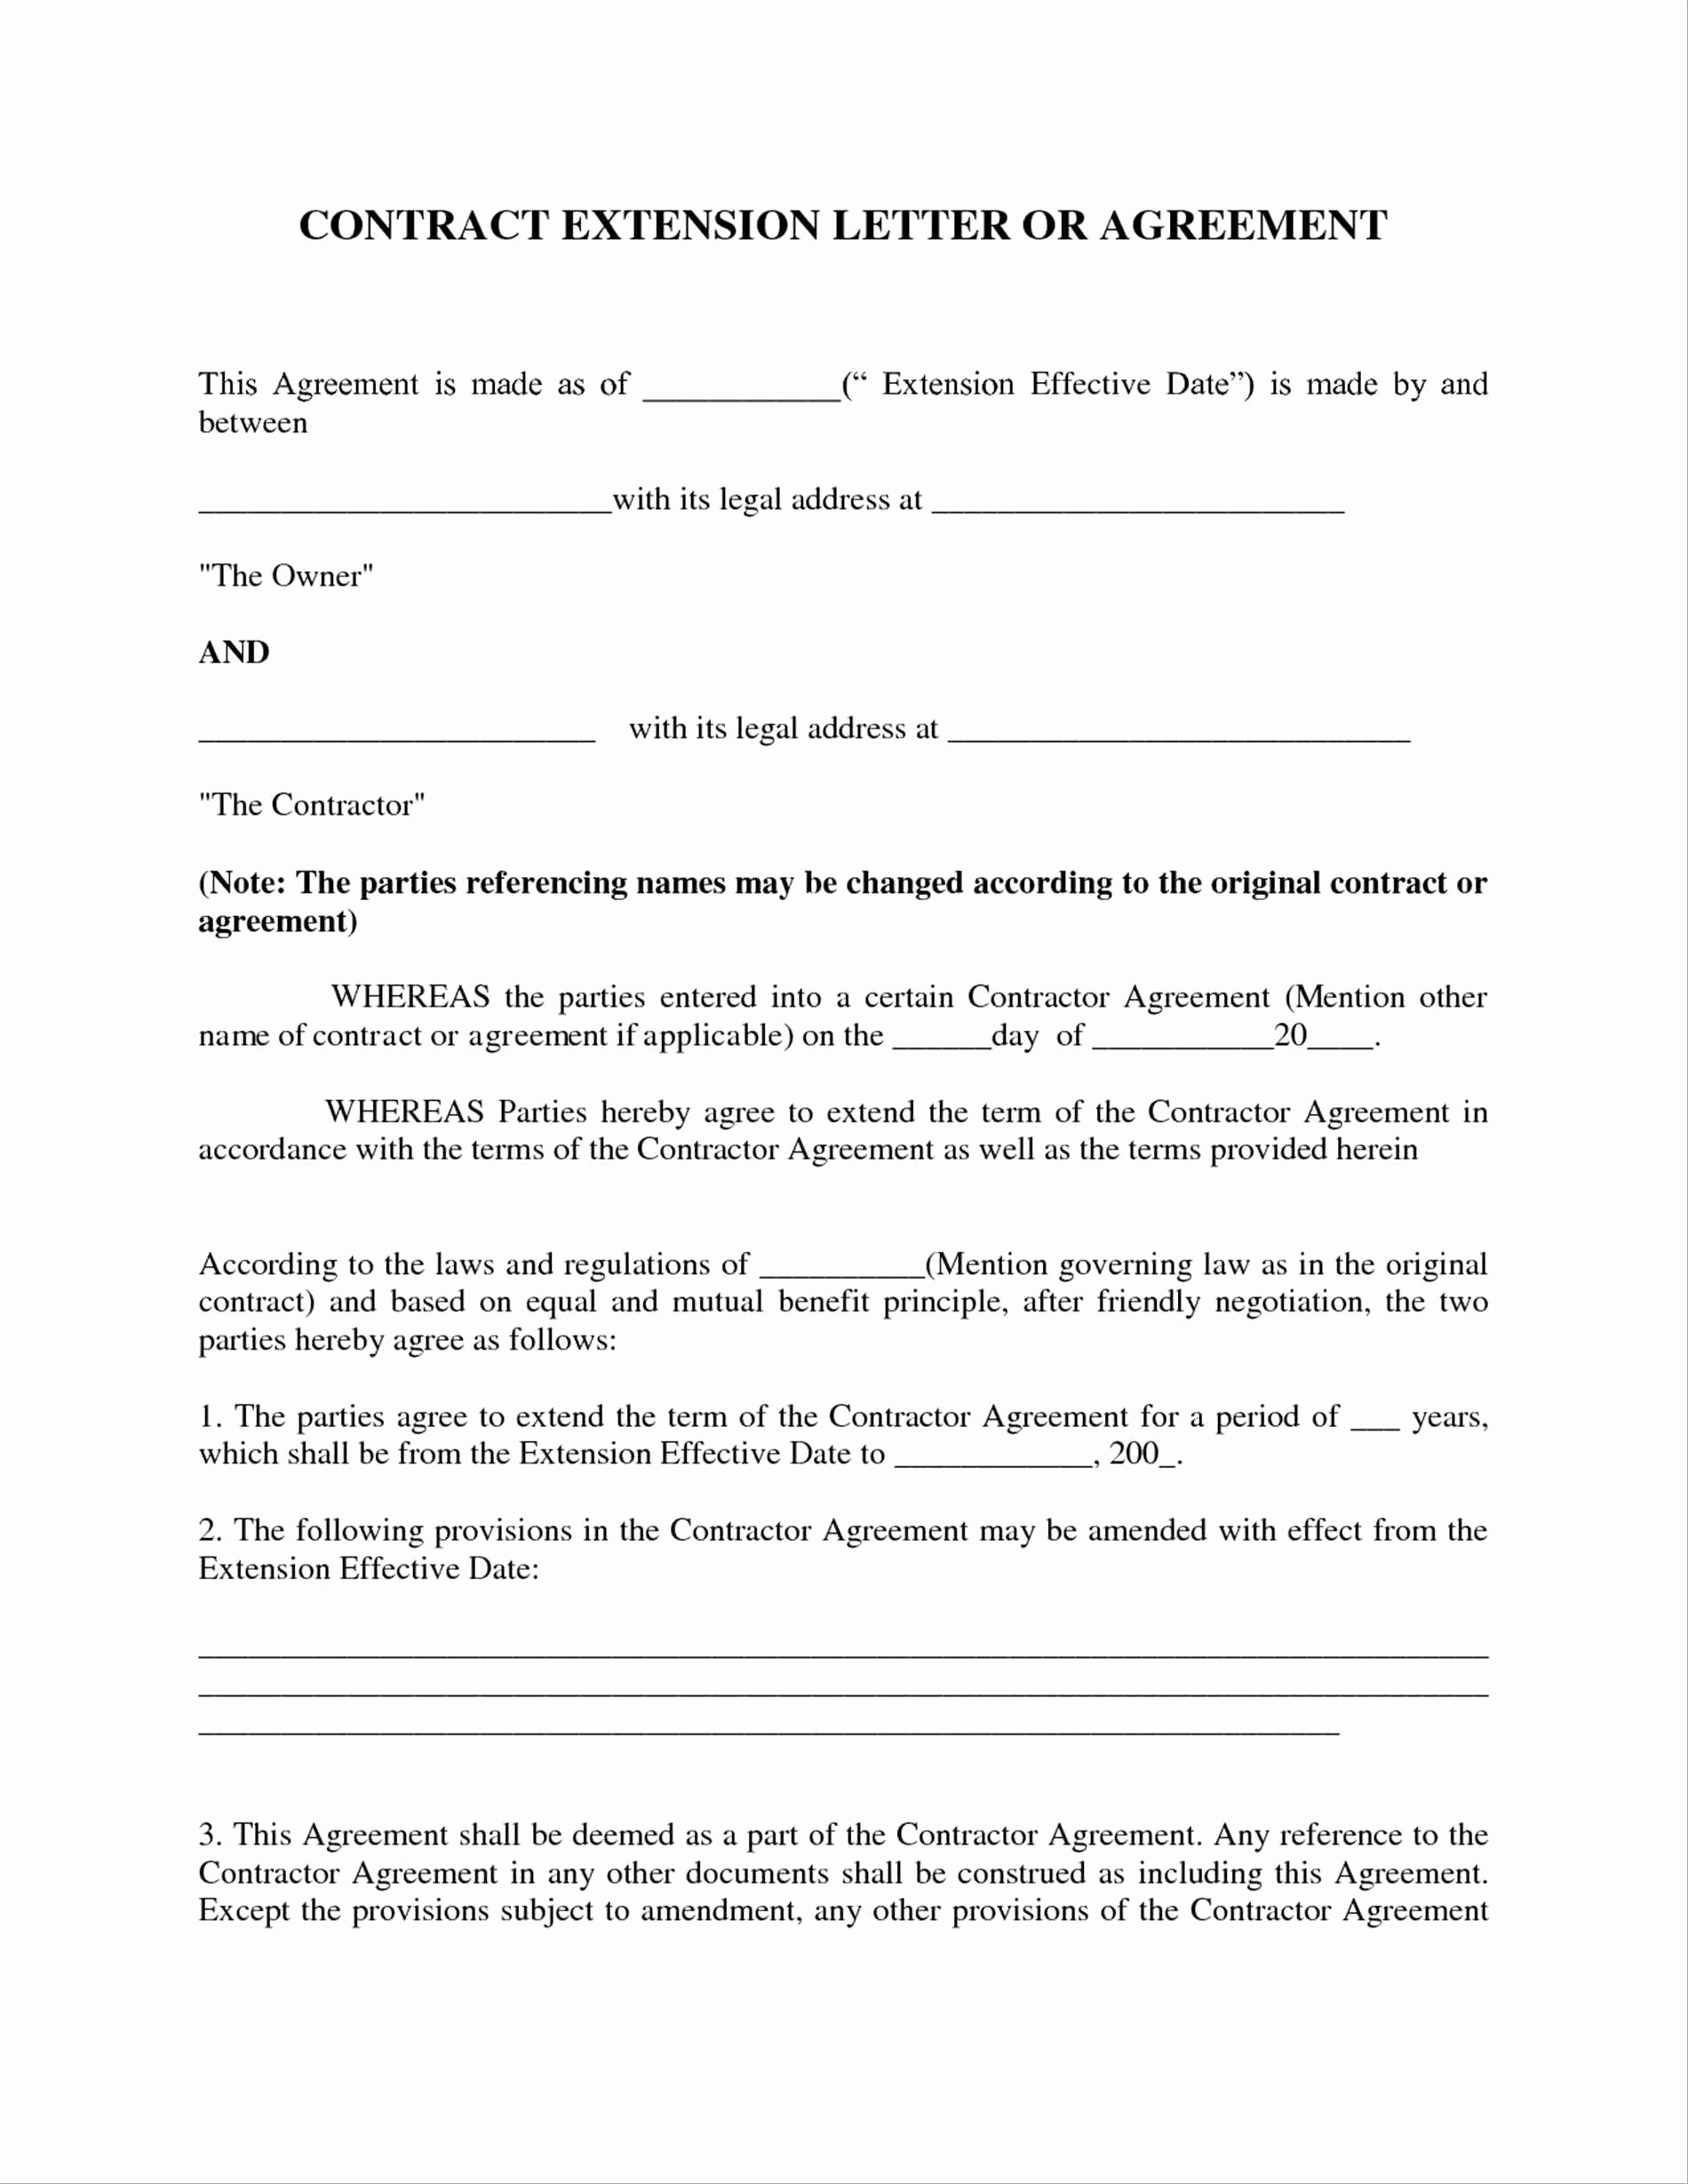 Simple Settlement Agreement Luxury Agreement Letter Between Two Parties